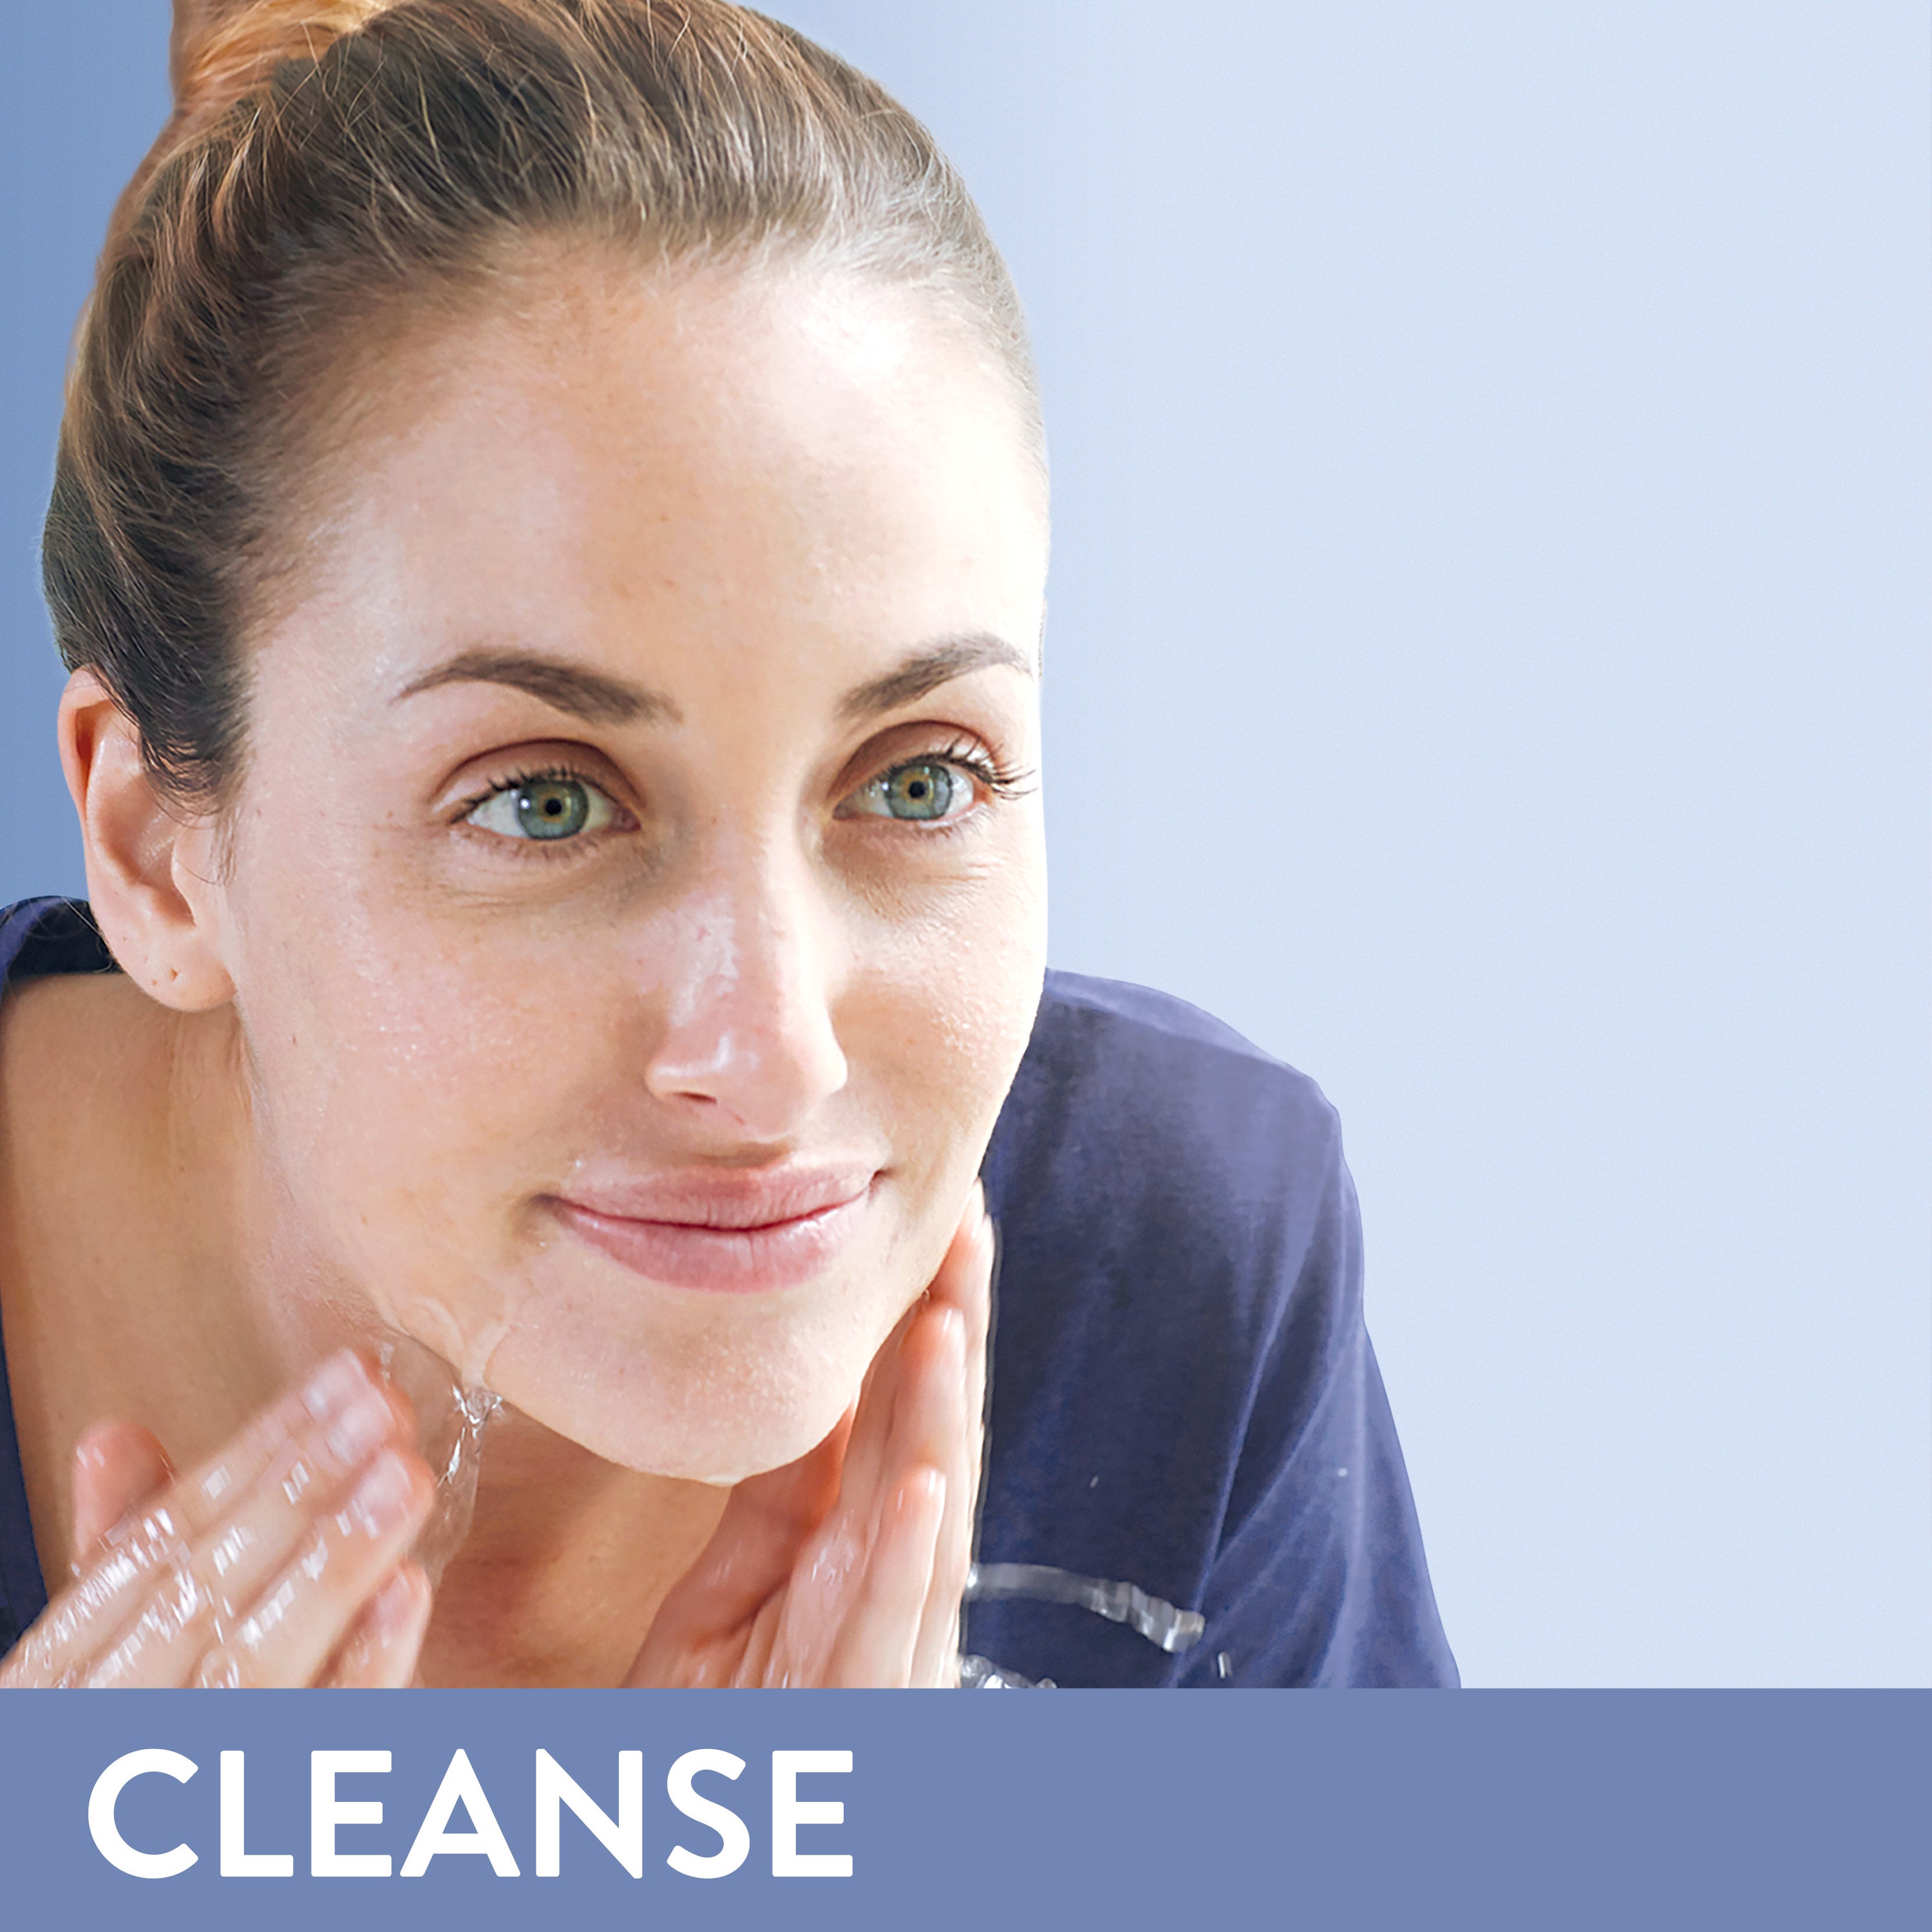 CLEANSE - woman washing her face